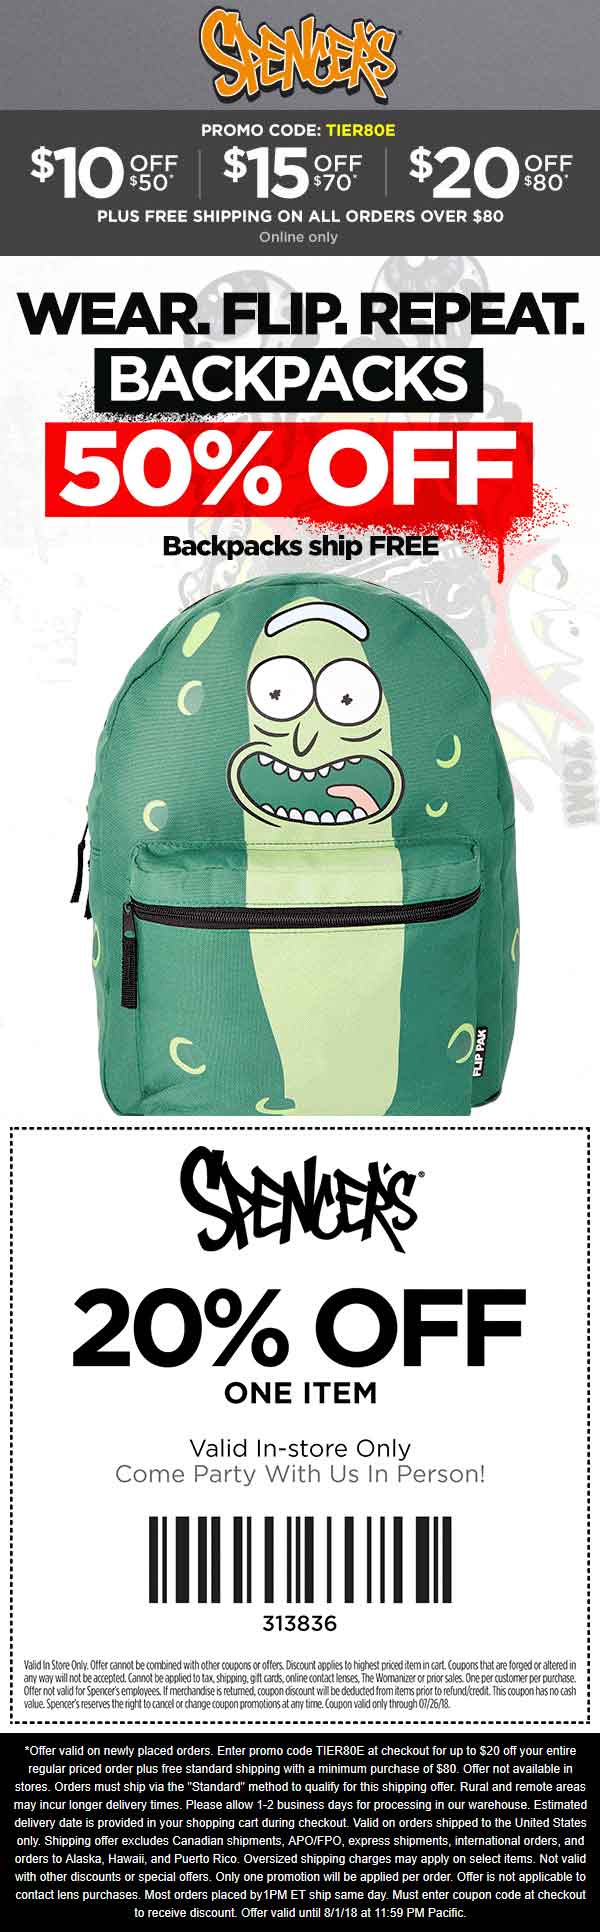 Spencers Coupon May 2024 50% off backpacks, 20% off a single item at Spencers, or $10 off $50 & more online via promo TIER80E